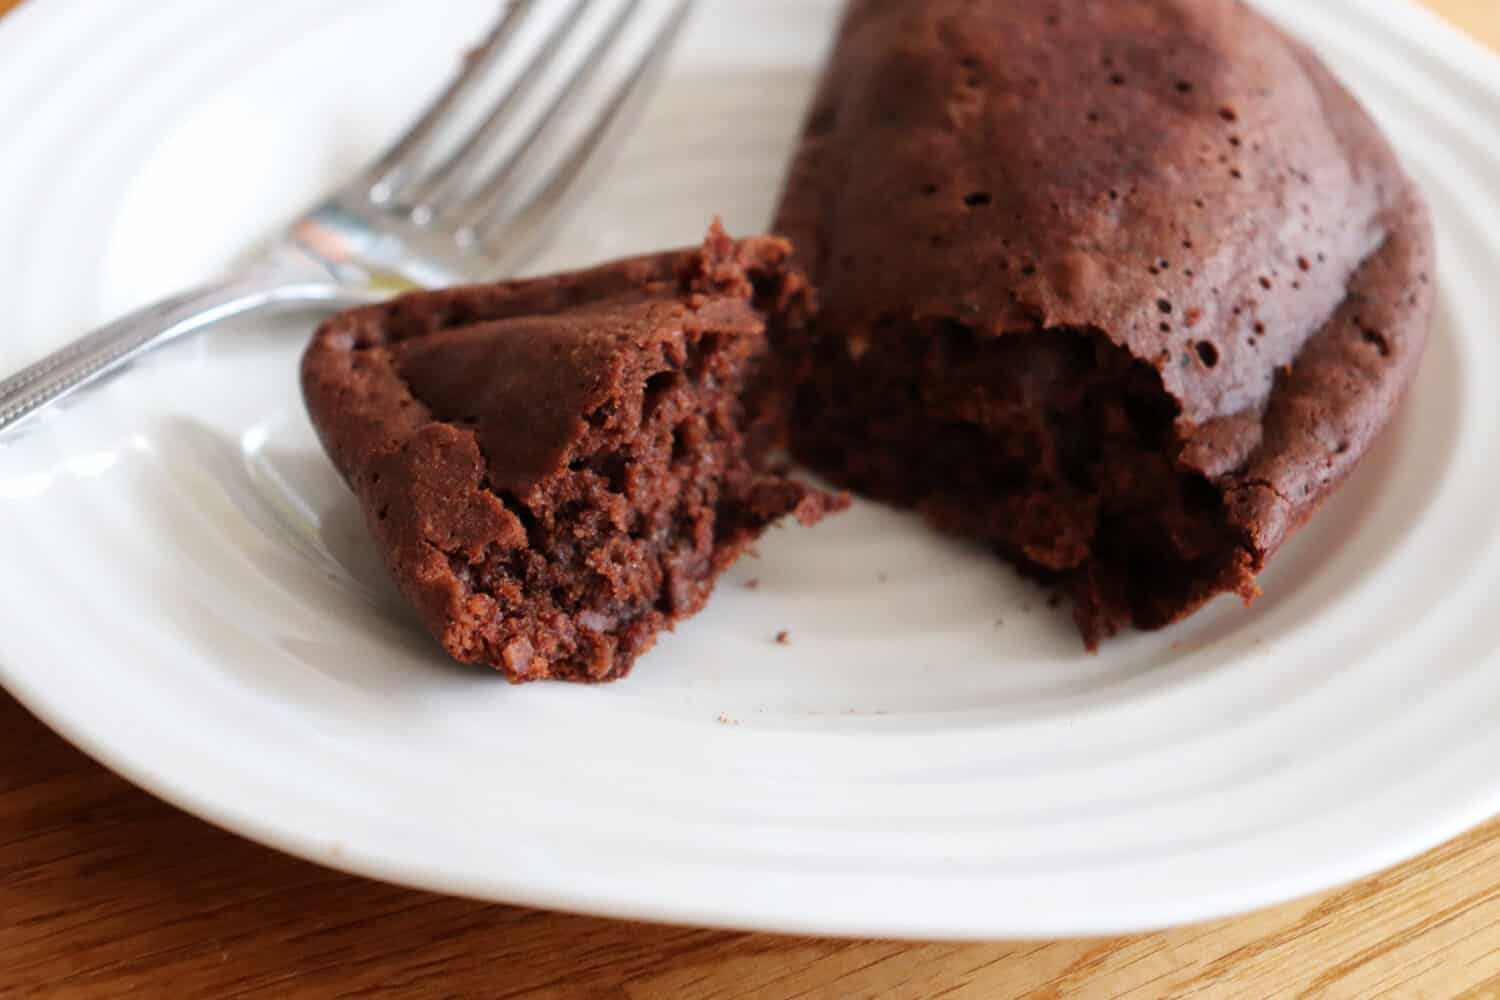 Chocolate cake made in an omelette maker